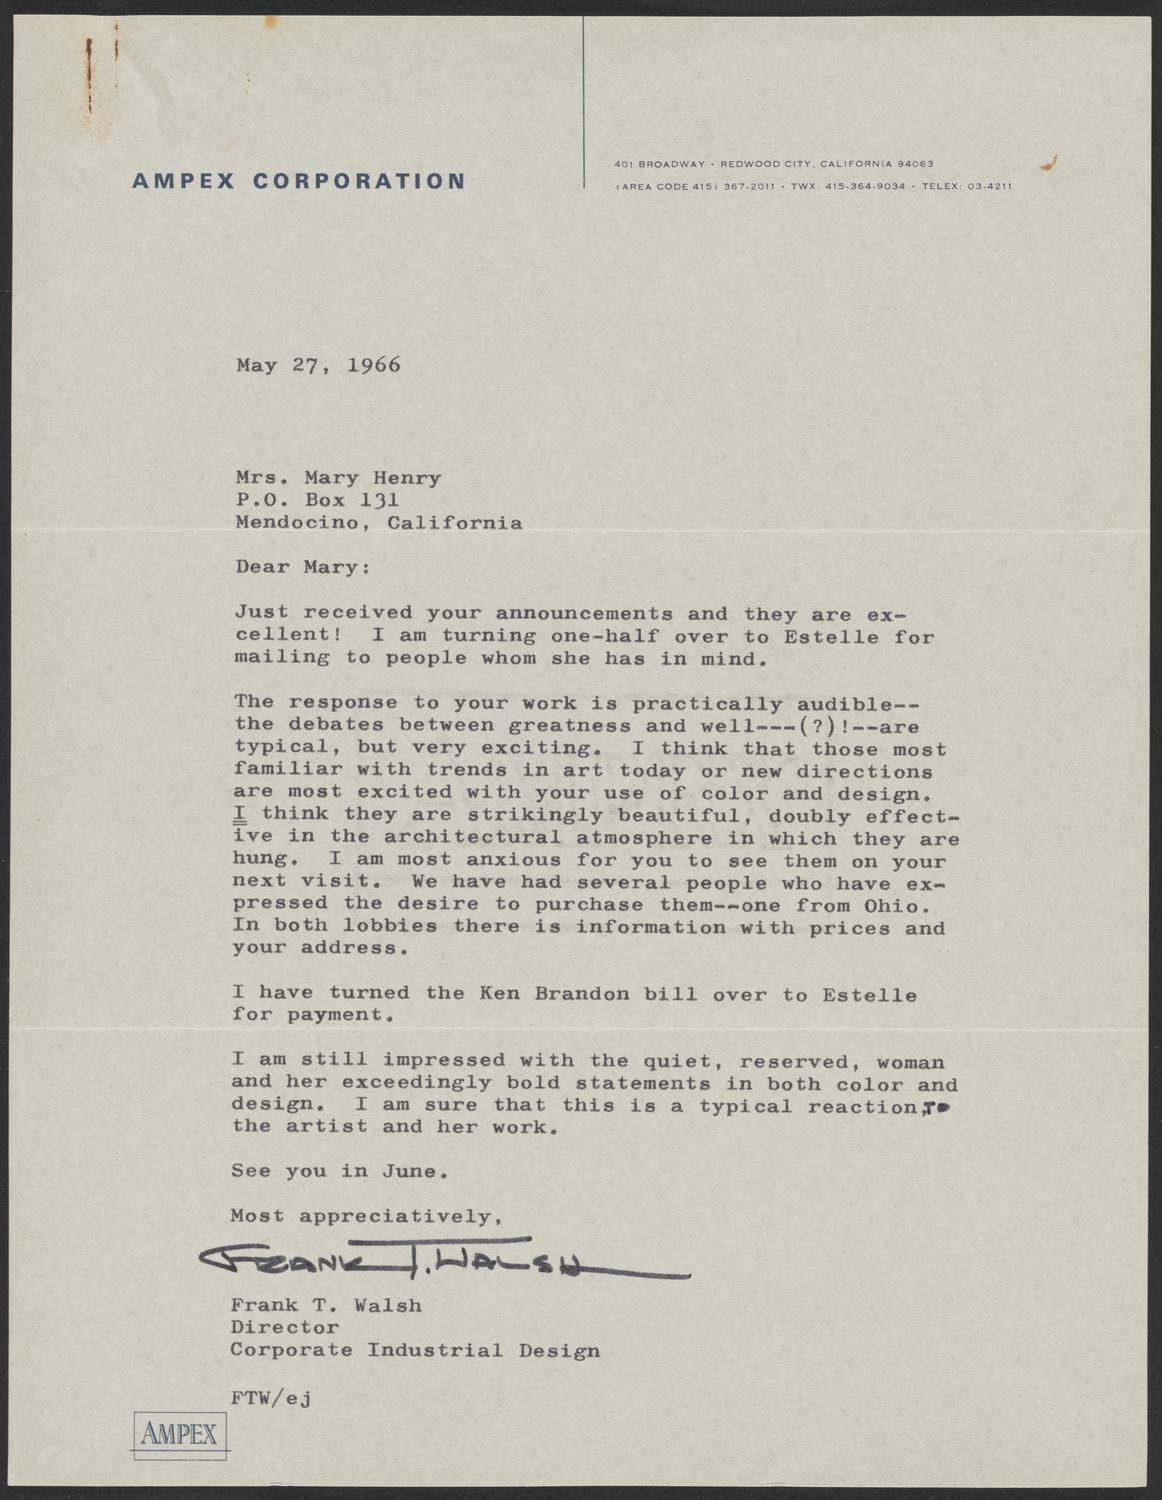 Letter from Frank T. Walsh to Mary Henry, May 27, 1966